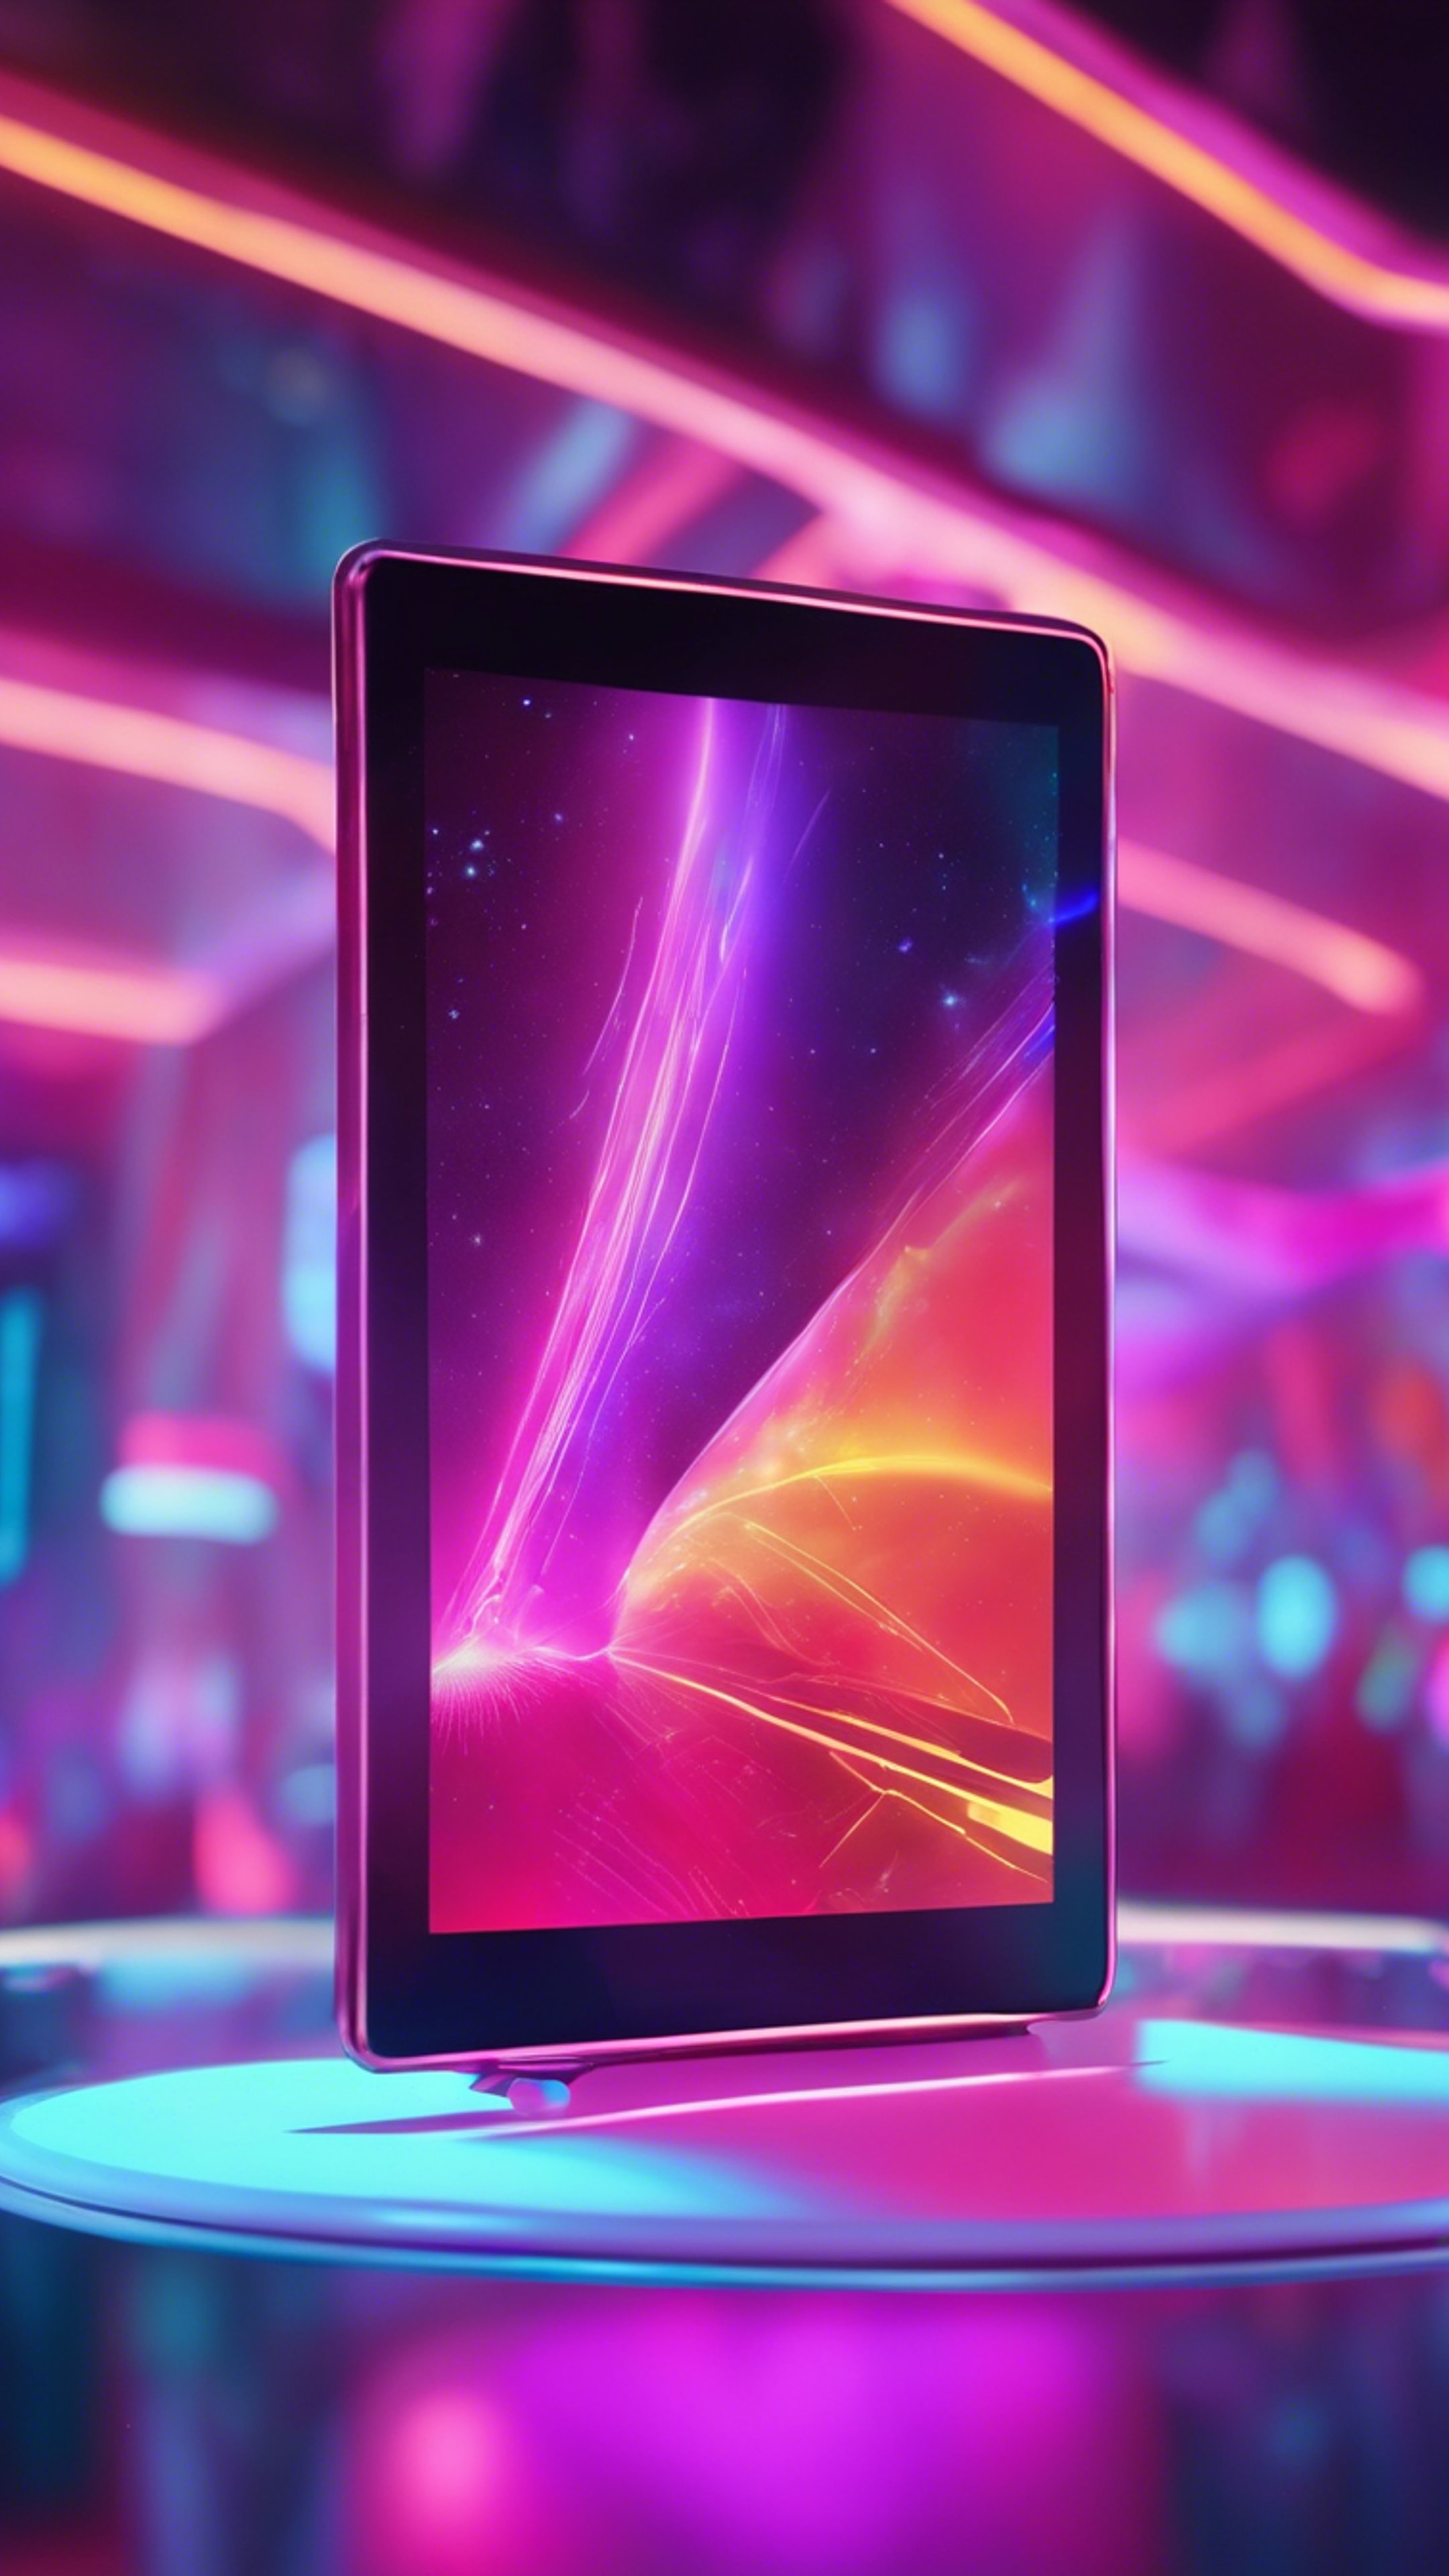 An ultra-modern tablet with a holographic touch screen floating in a futuristic, vividly colored neon environment. Papel de parede[25bfd648fdfb4eaf80d5]